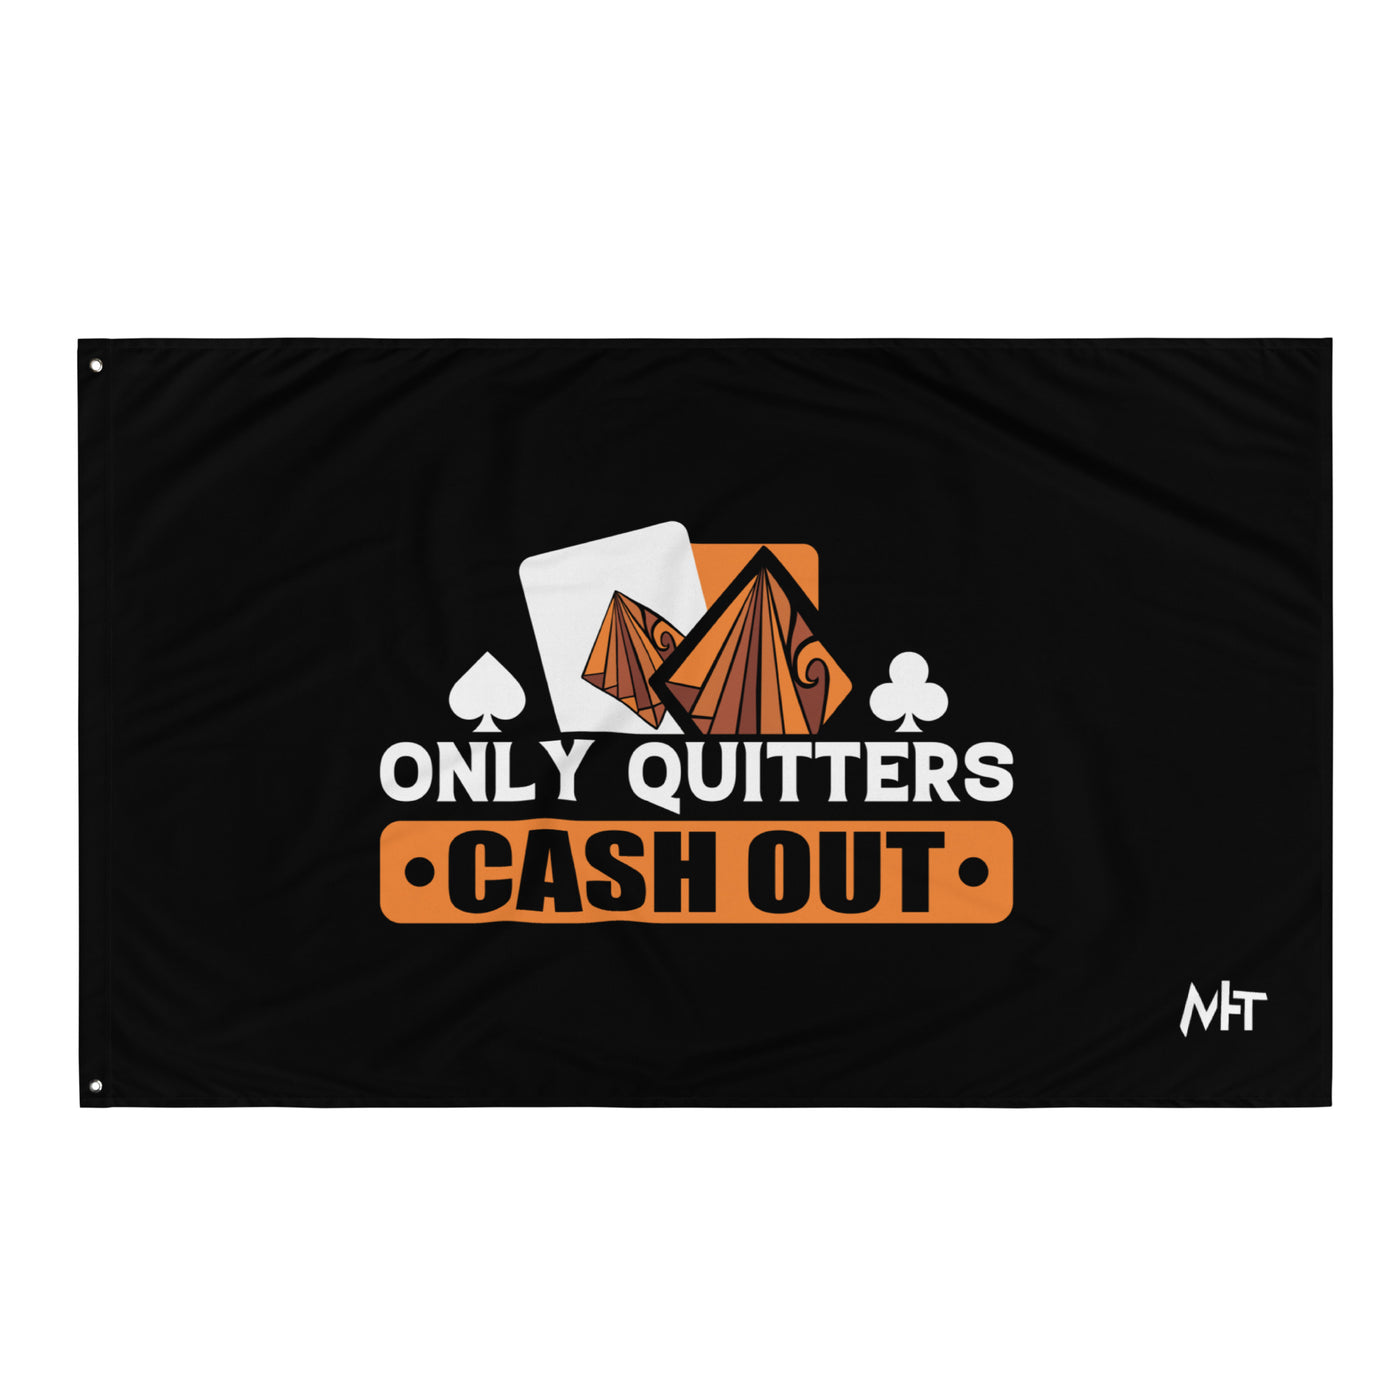 Only Quitters Cash Out - Flag